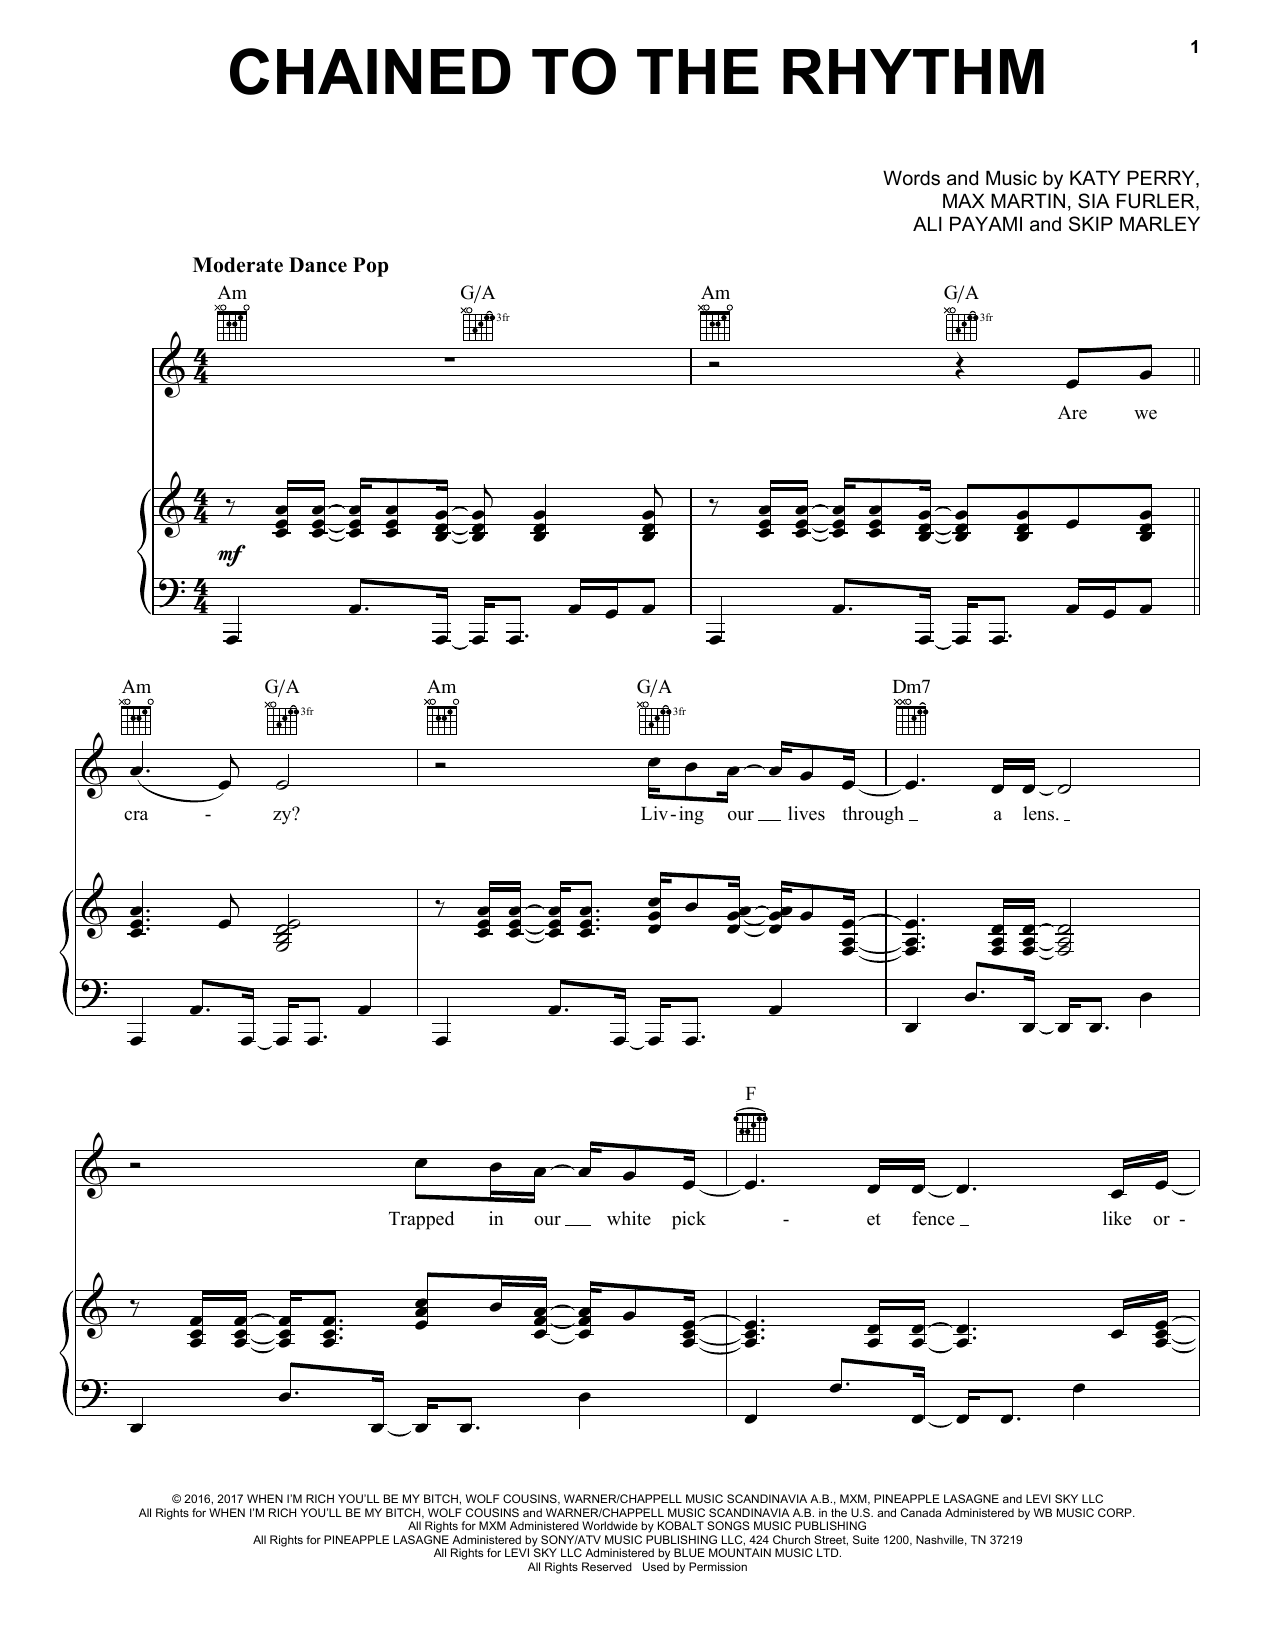 Katy Perry Chained To The Rhythm sheet music notes and chords. Download Printable PDF.